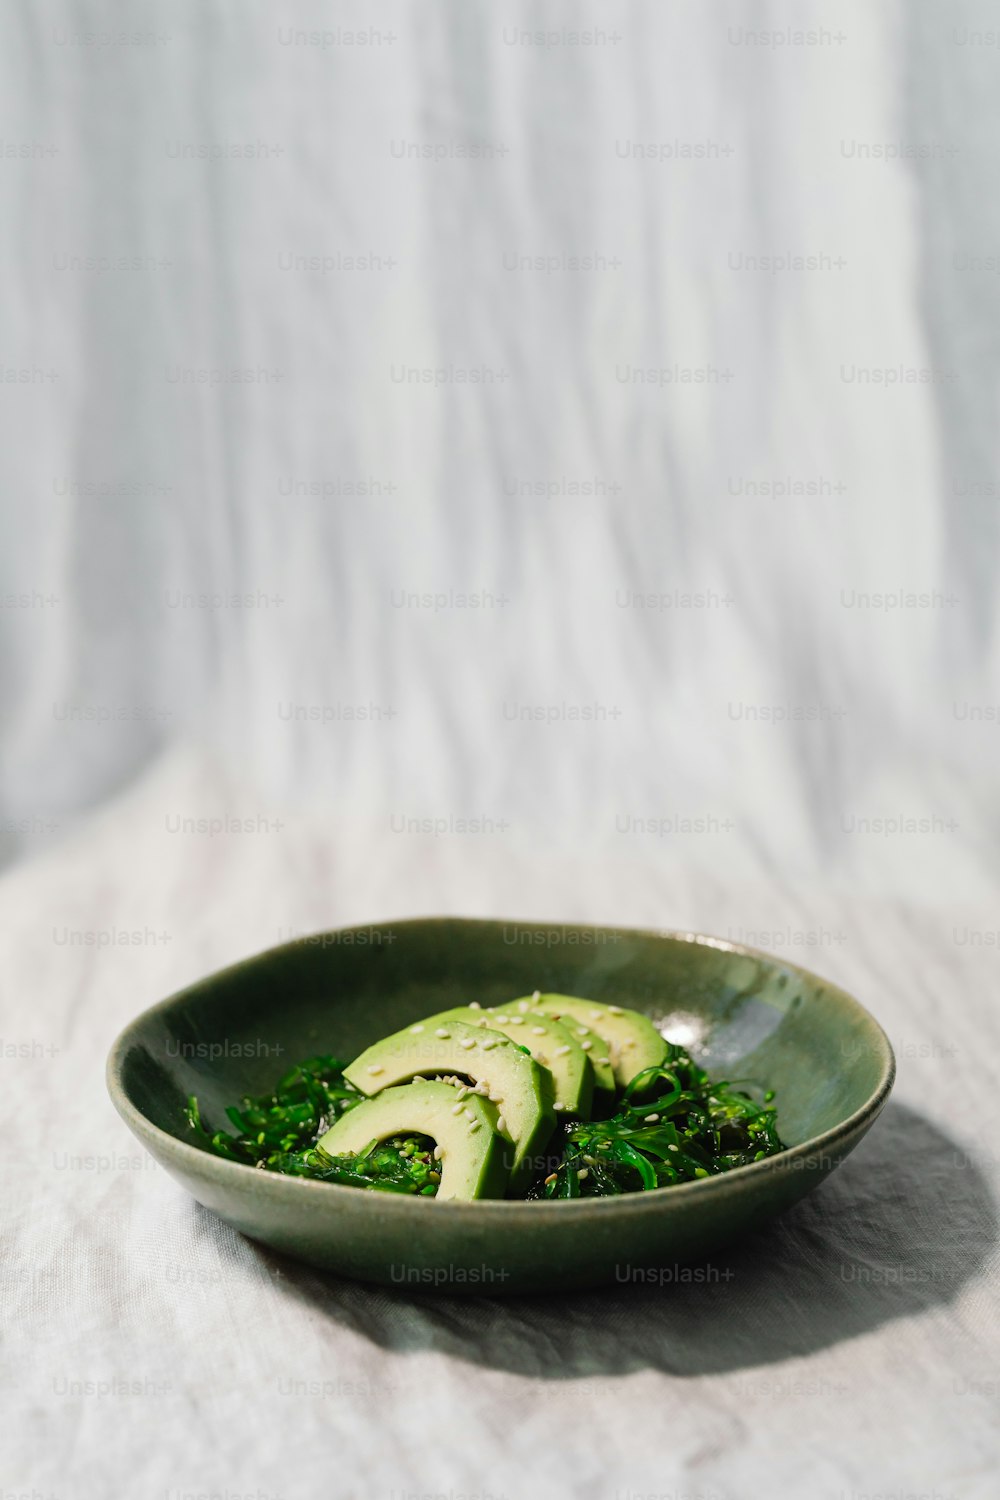 a green bowl filled with sliced avocados on top of a table